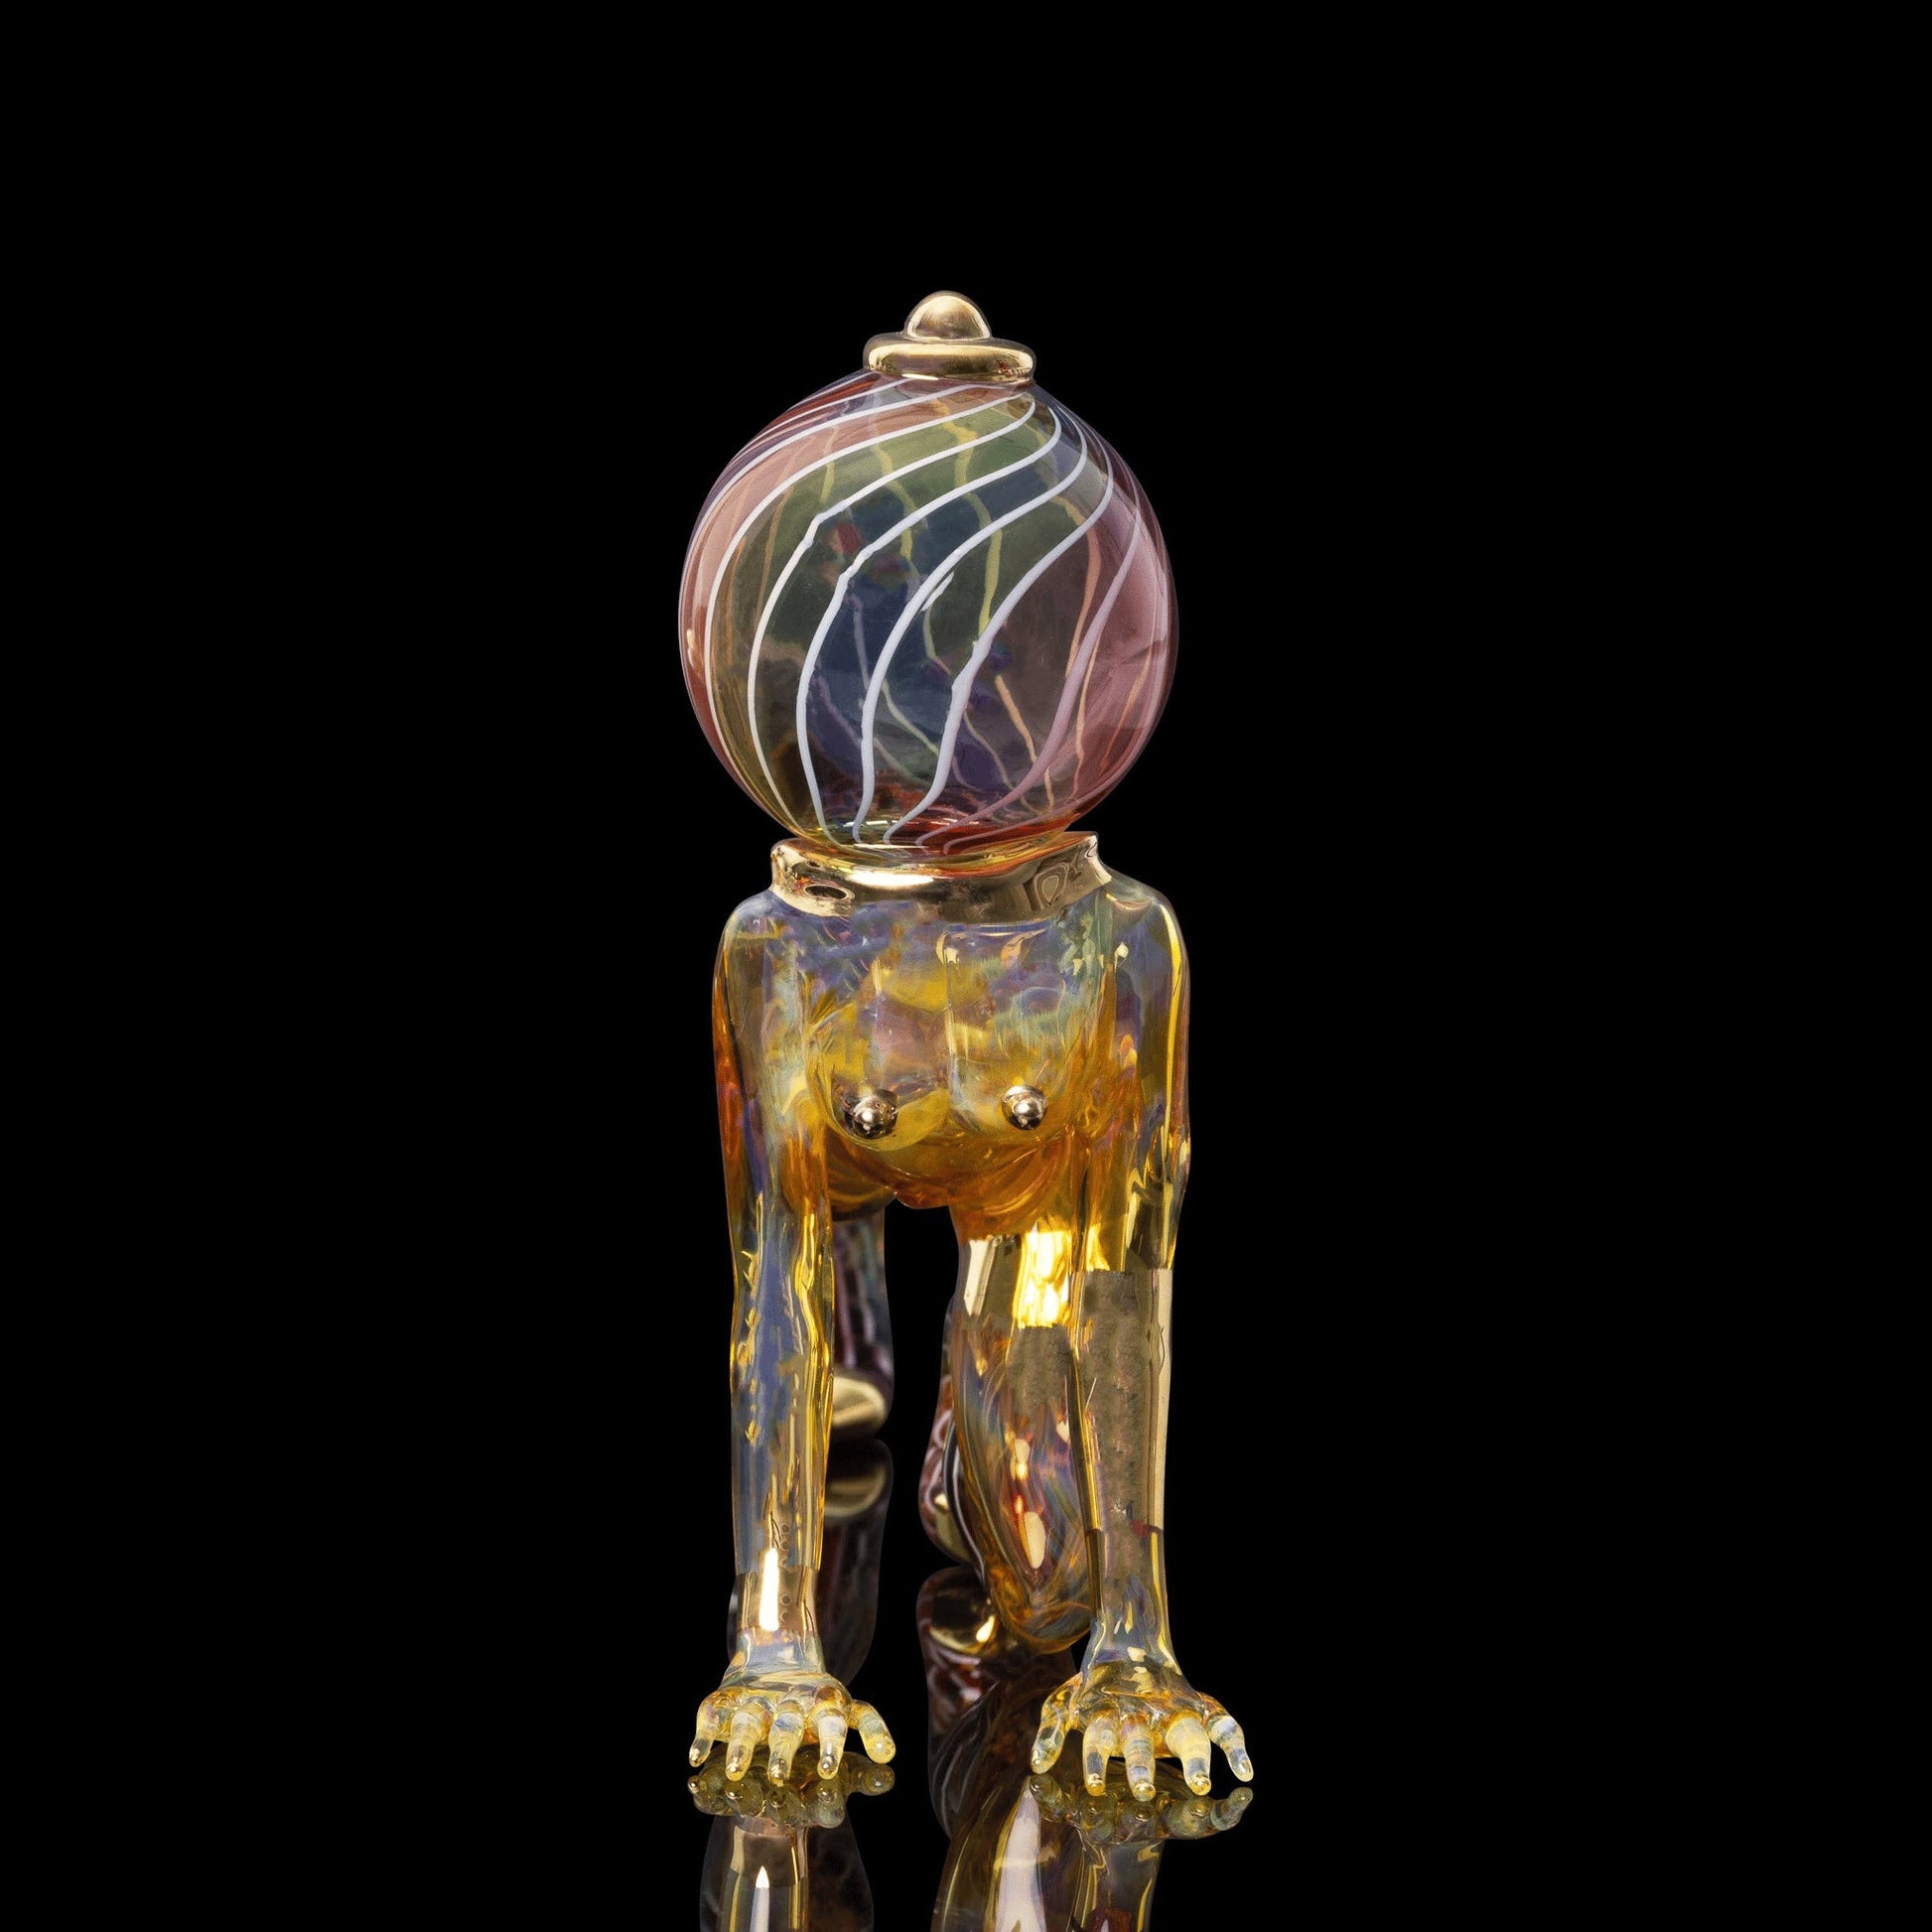 artisan-crafted design of the Collab Astronaut Girl Dry Pipe by Sibelley x Karma Glass (Cyber Punks 2022 Release)